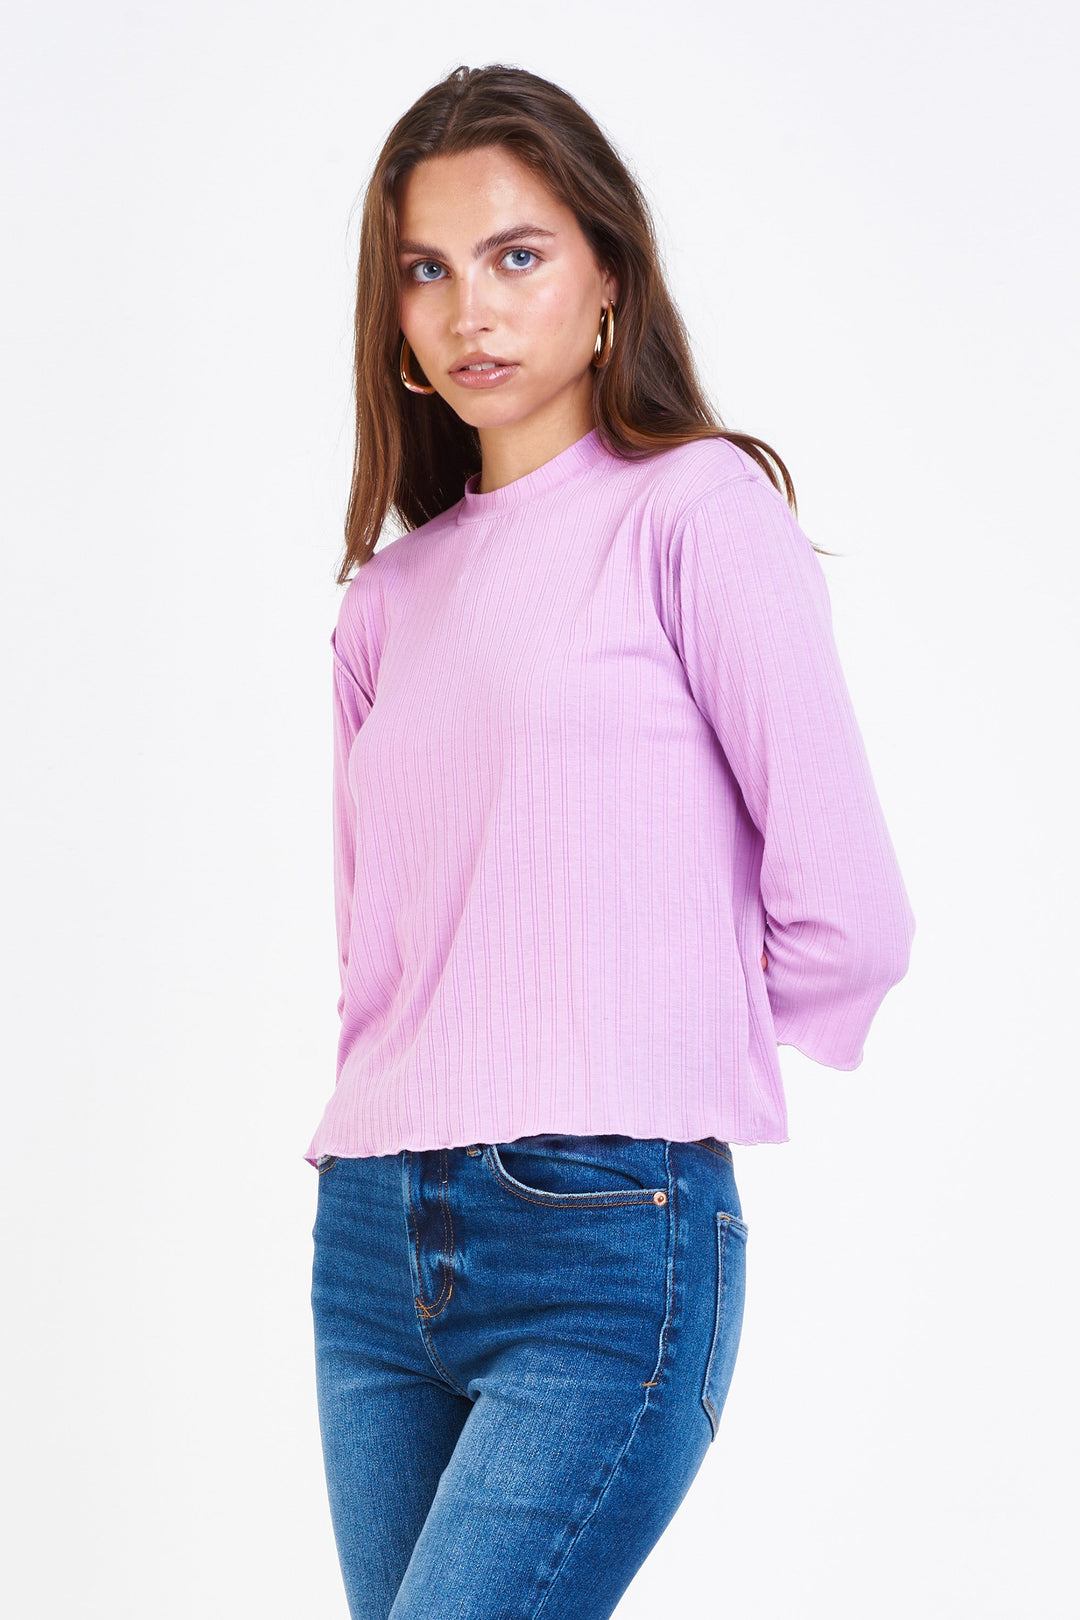 image of a female model wearing a JULIET VERIGATED RIB TOP PINK LAVENDER TOPS